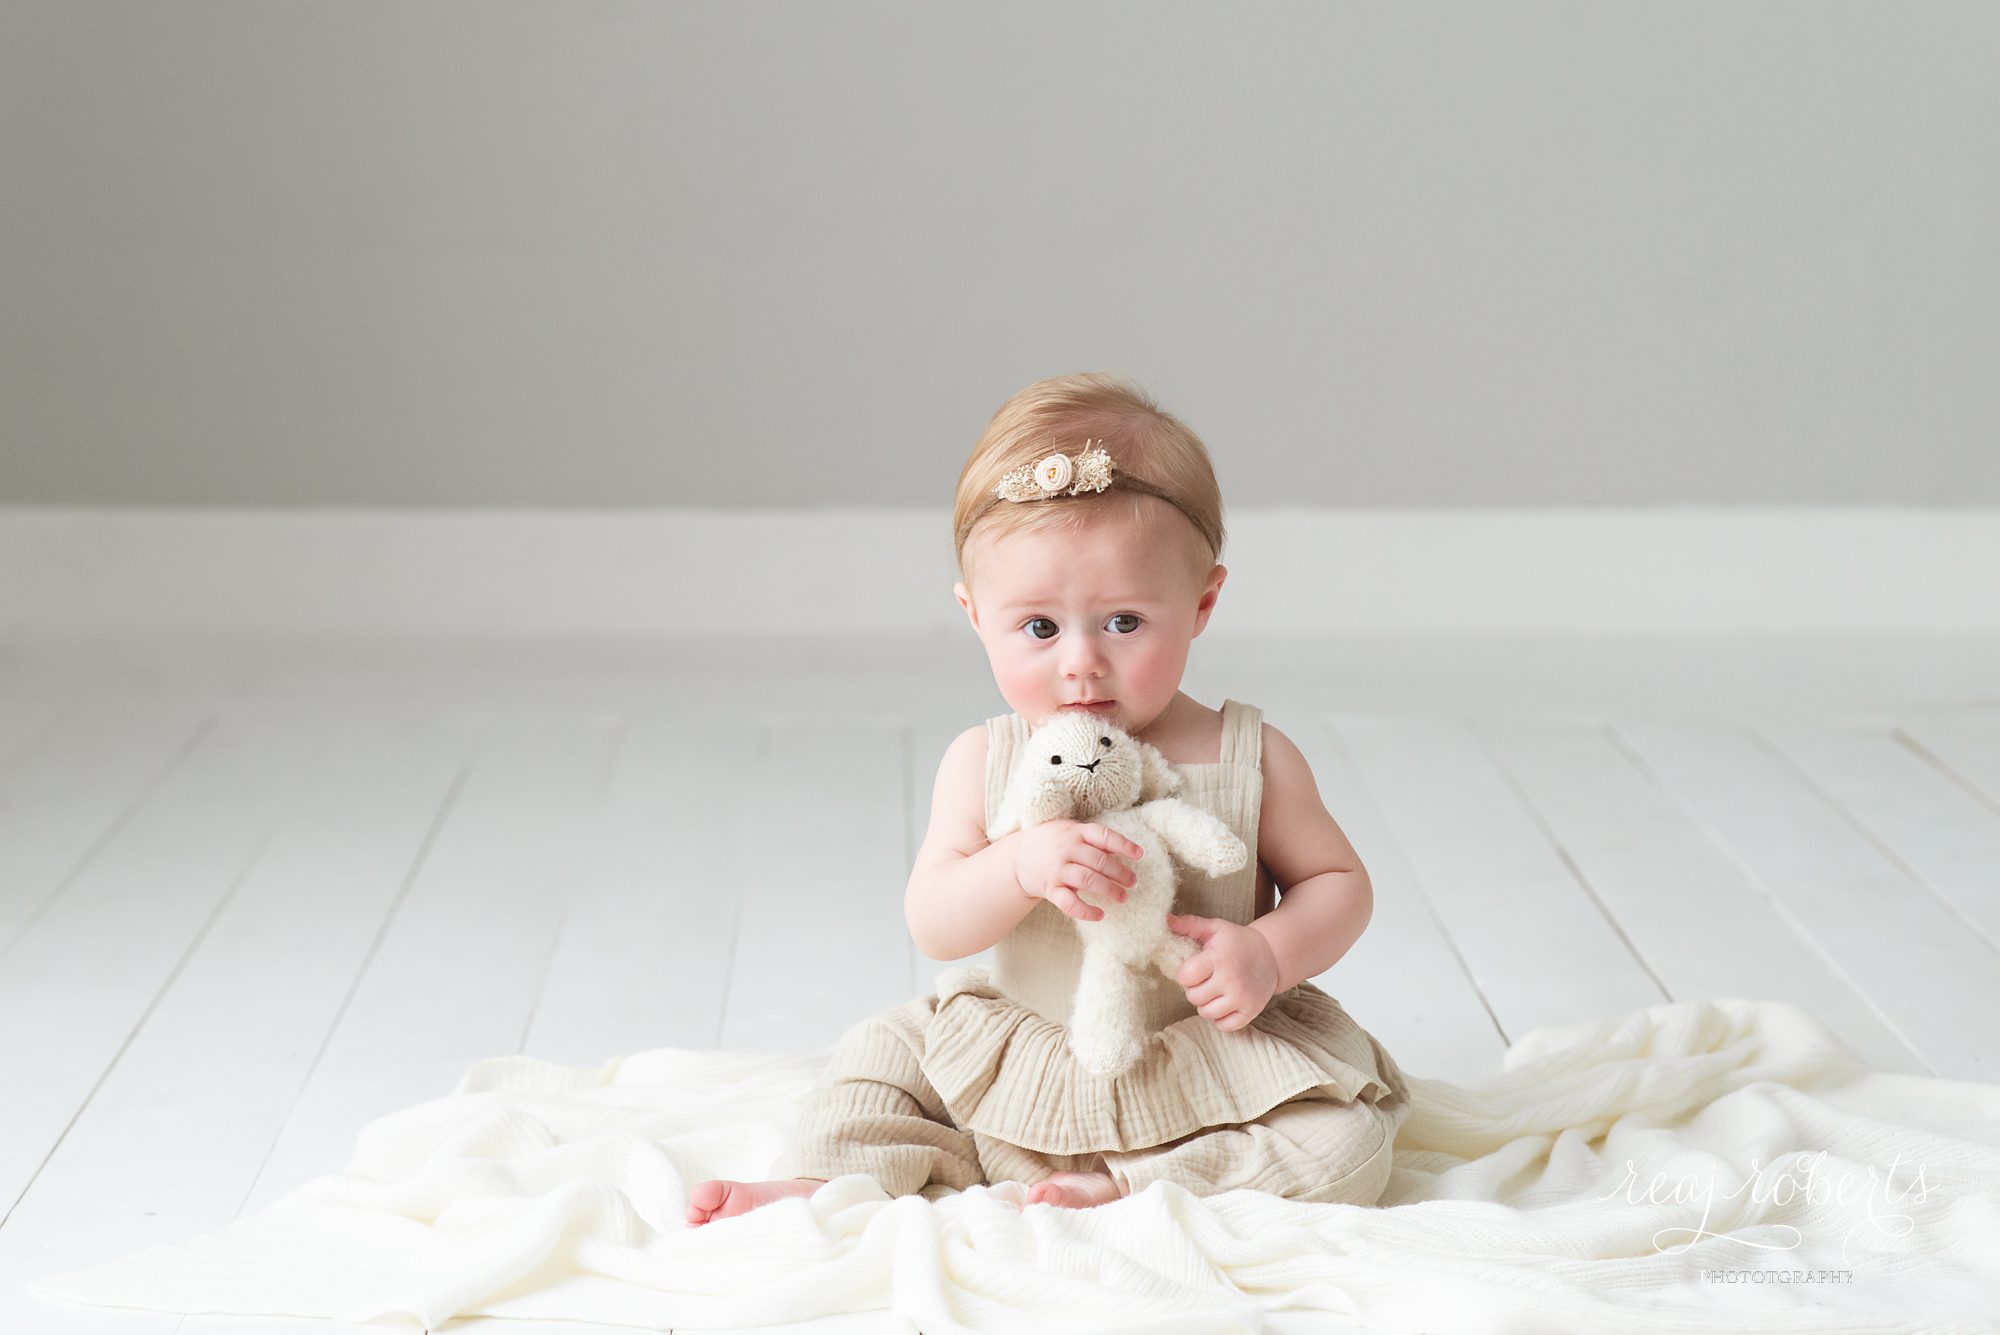 6 month baby photographer with a pure, simple, natural, and organic style | Chandler, Arizona | Reaj Roberts Photography